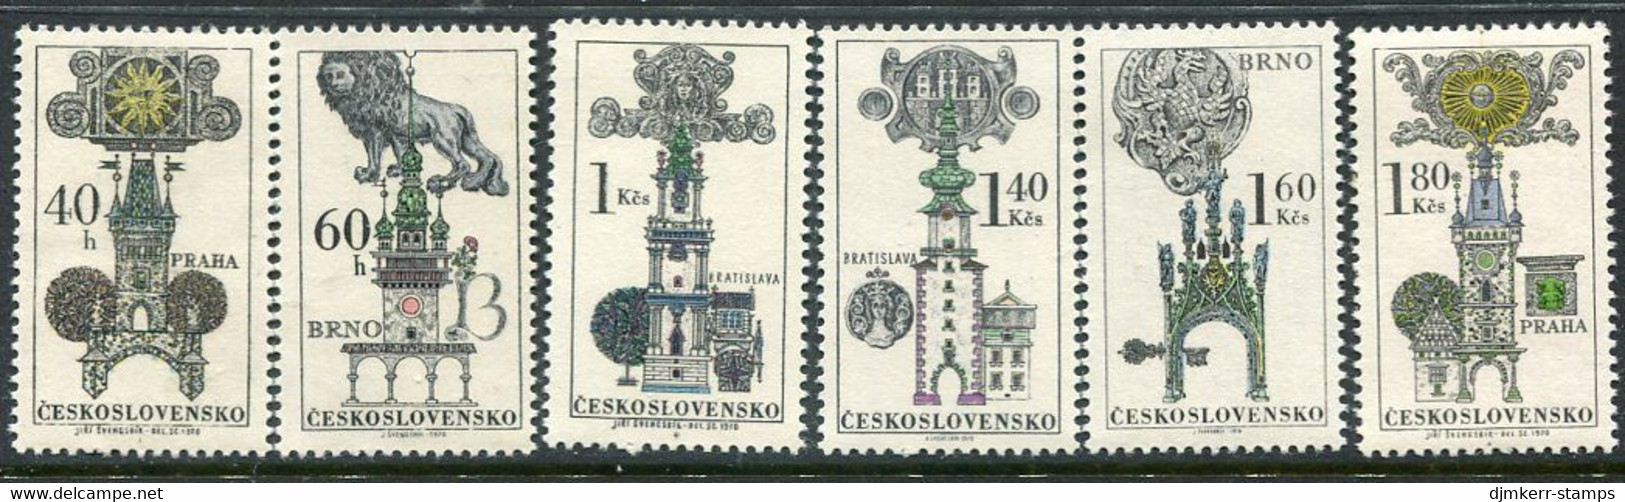 CZECHOSLOVAKIA 1970 Old House Signs MNH / ** Michel 1952-57 - Unused Stamps